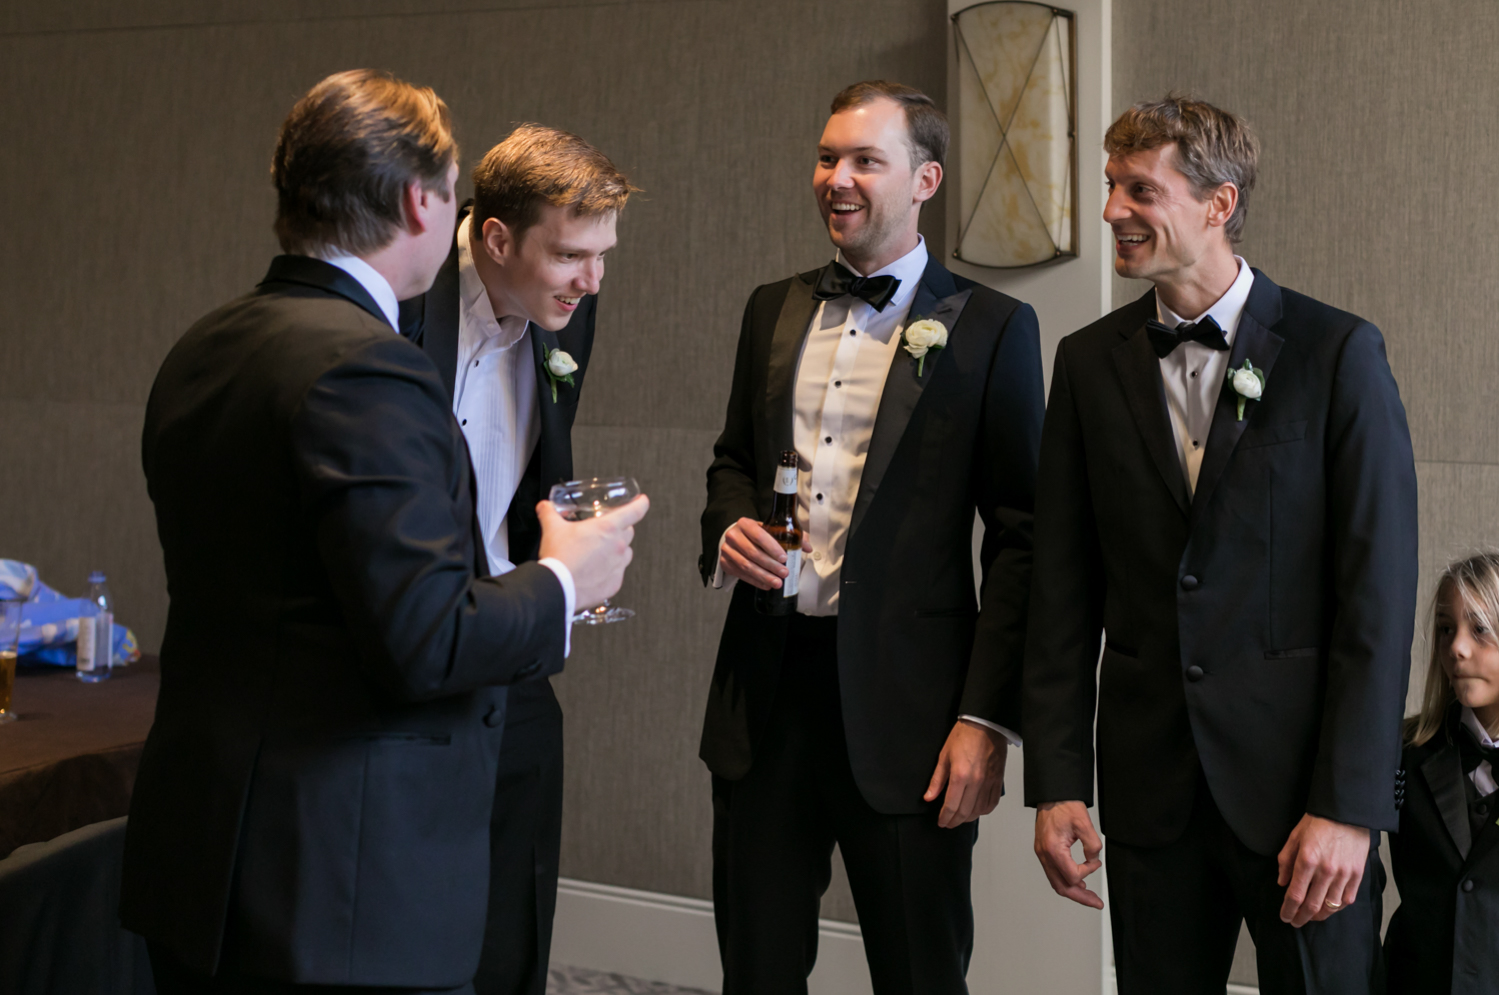 The groom laughs with his groomsmen as they share drinks before the ceremony